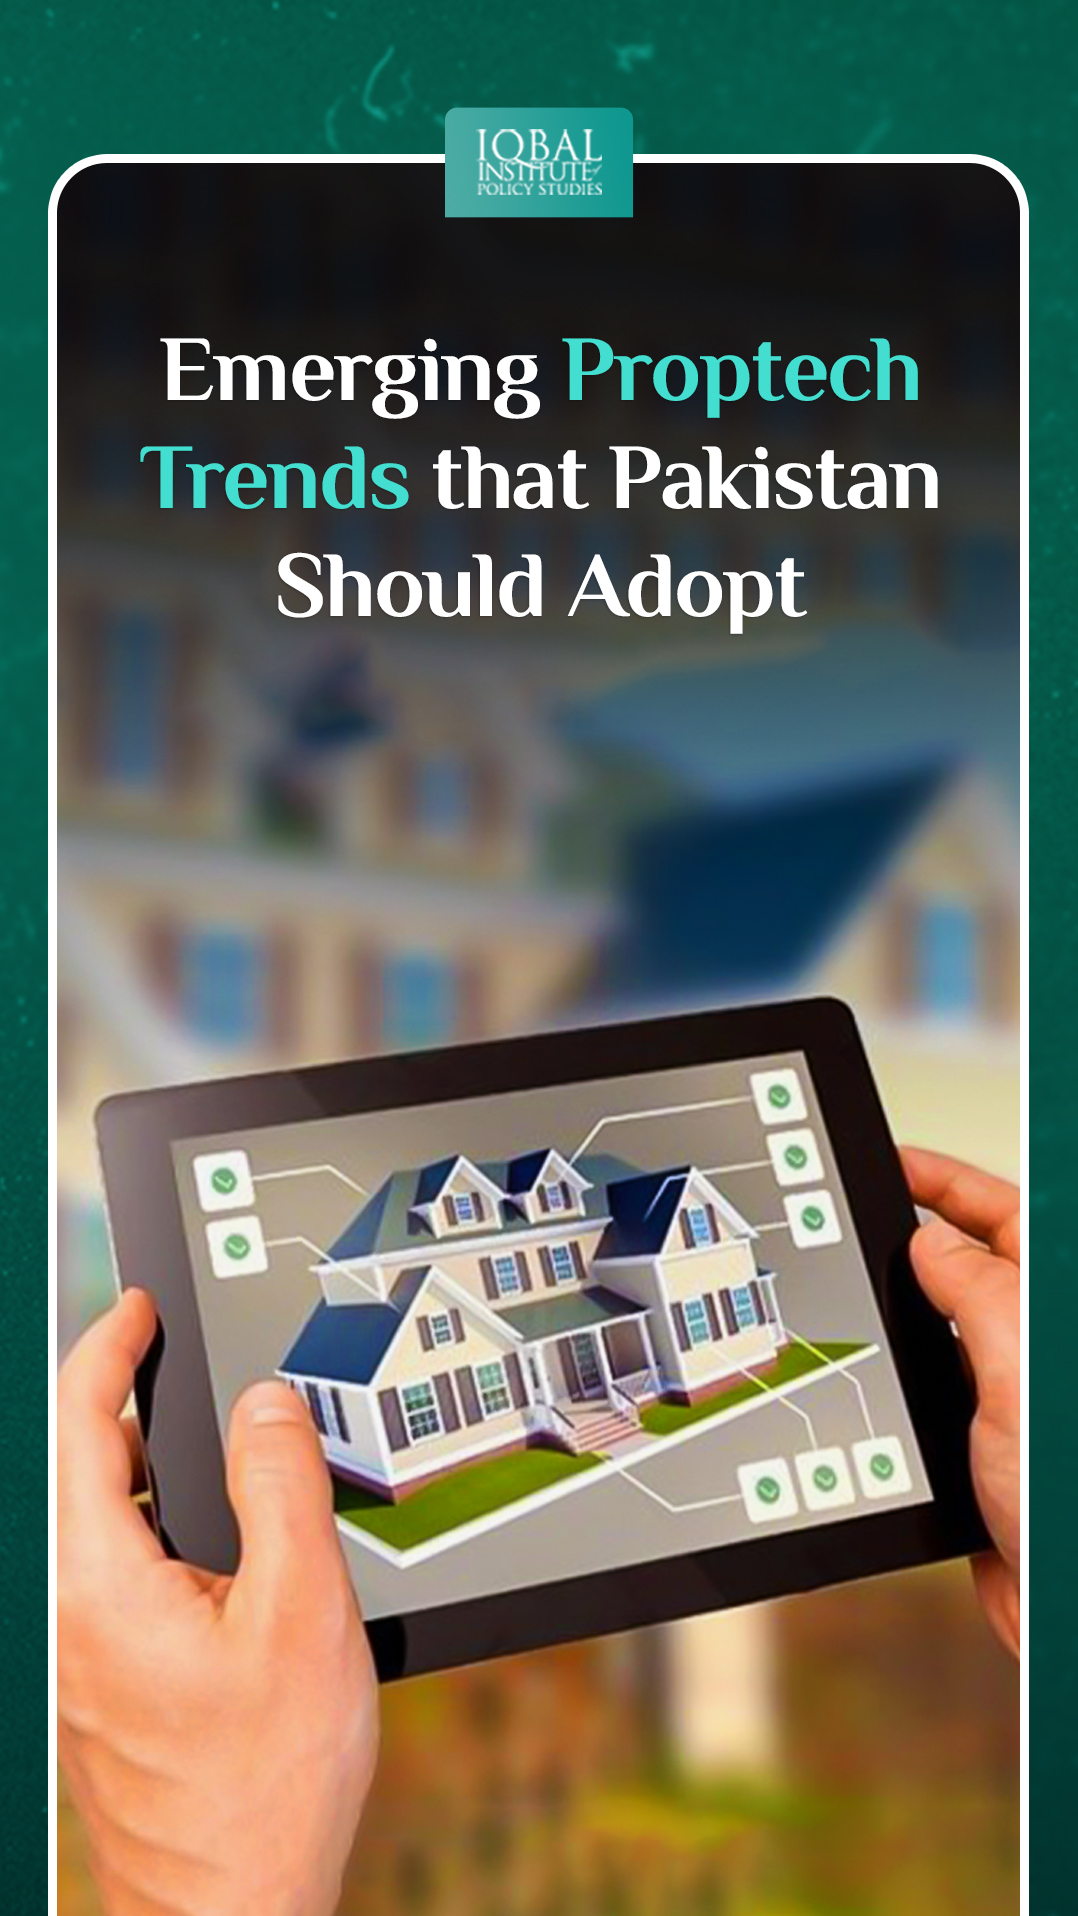 Emerging Proptech Trends that Pakistan Should Adopt